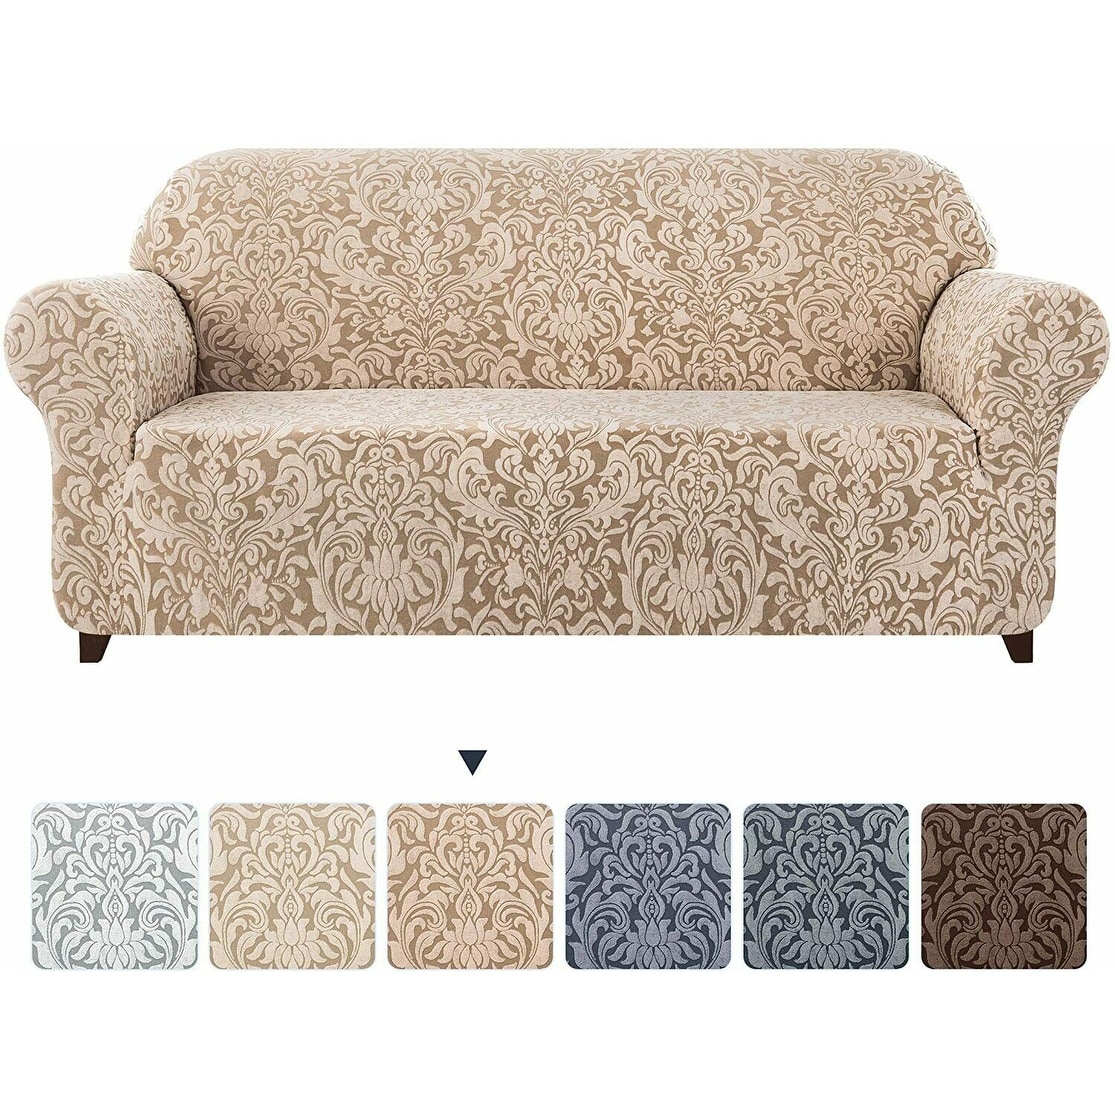 Subrtex Reversible Sofa Couch Cover Quilted Slipcover Furniture Protector -  On Sale - Bed Bath & Beyond - 32675438